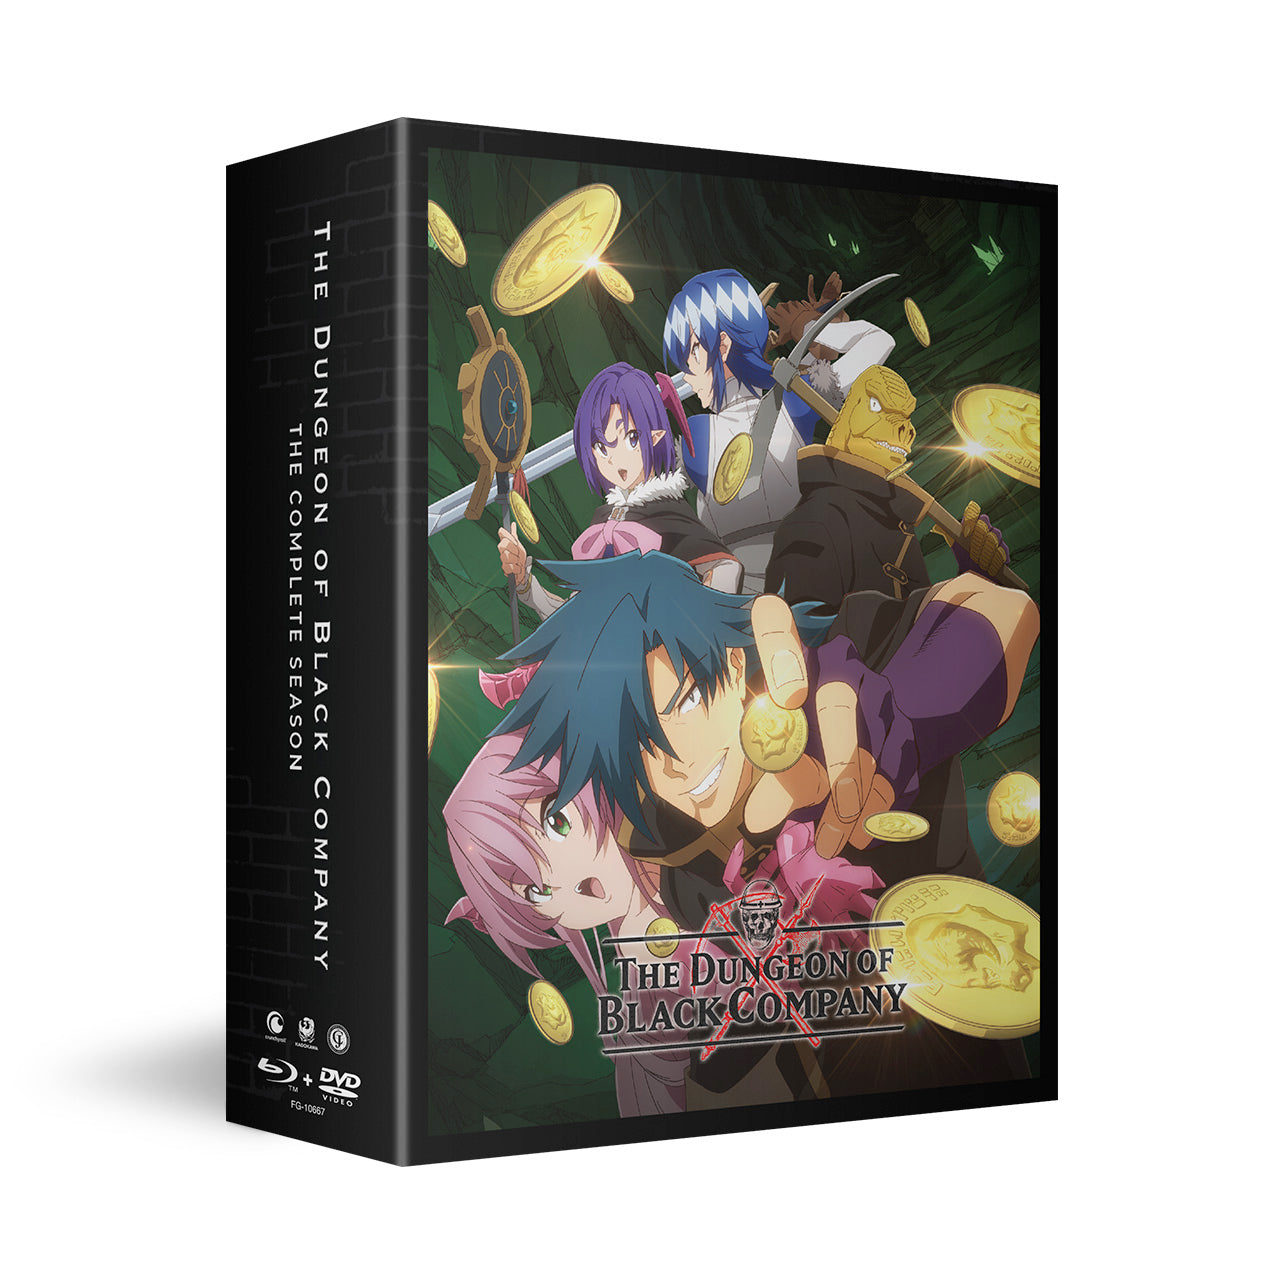 The Dungeon of Black Company - The Complete Season - BD/DVD - LE image count 2